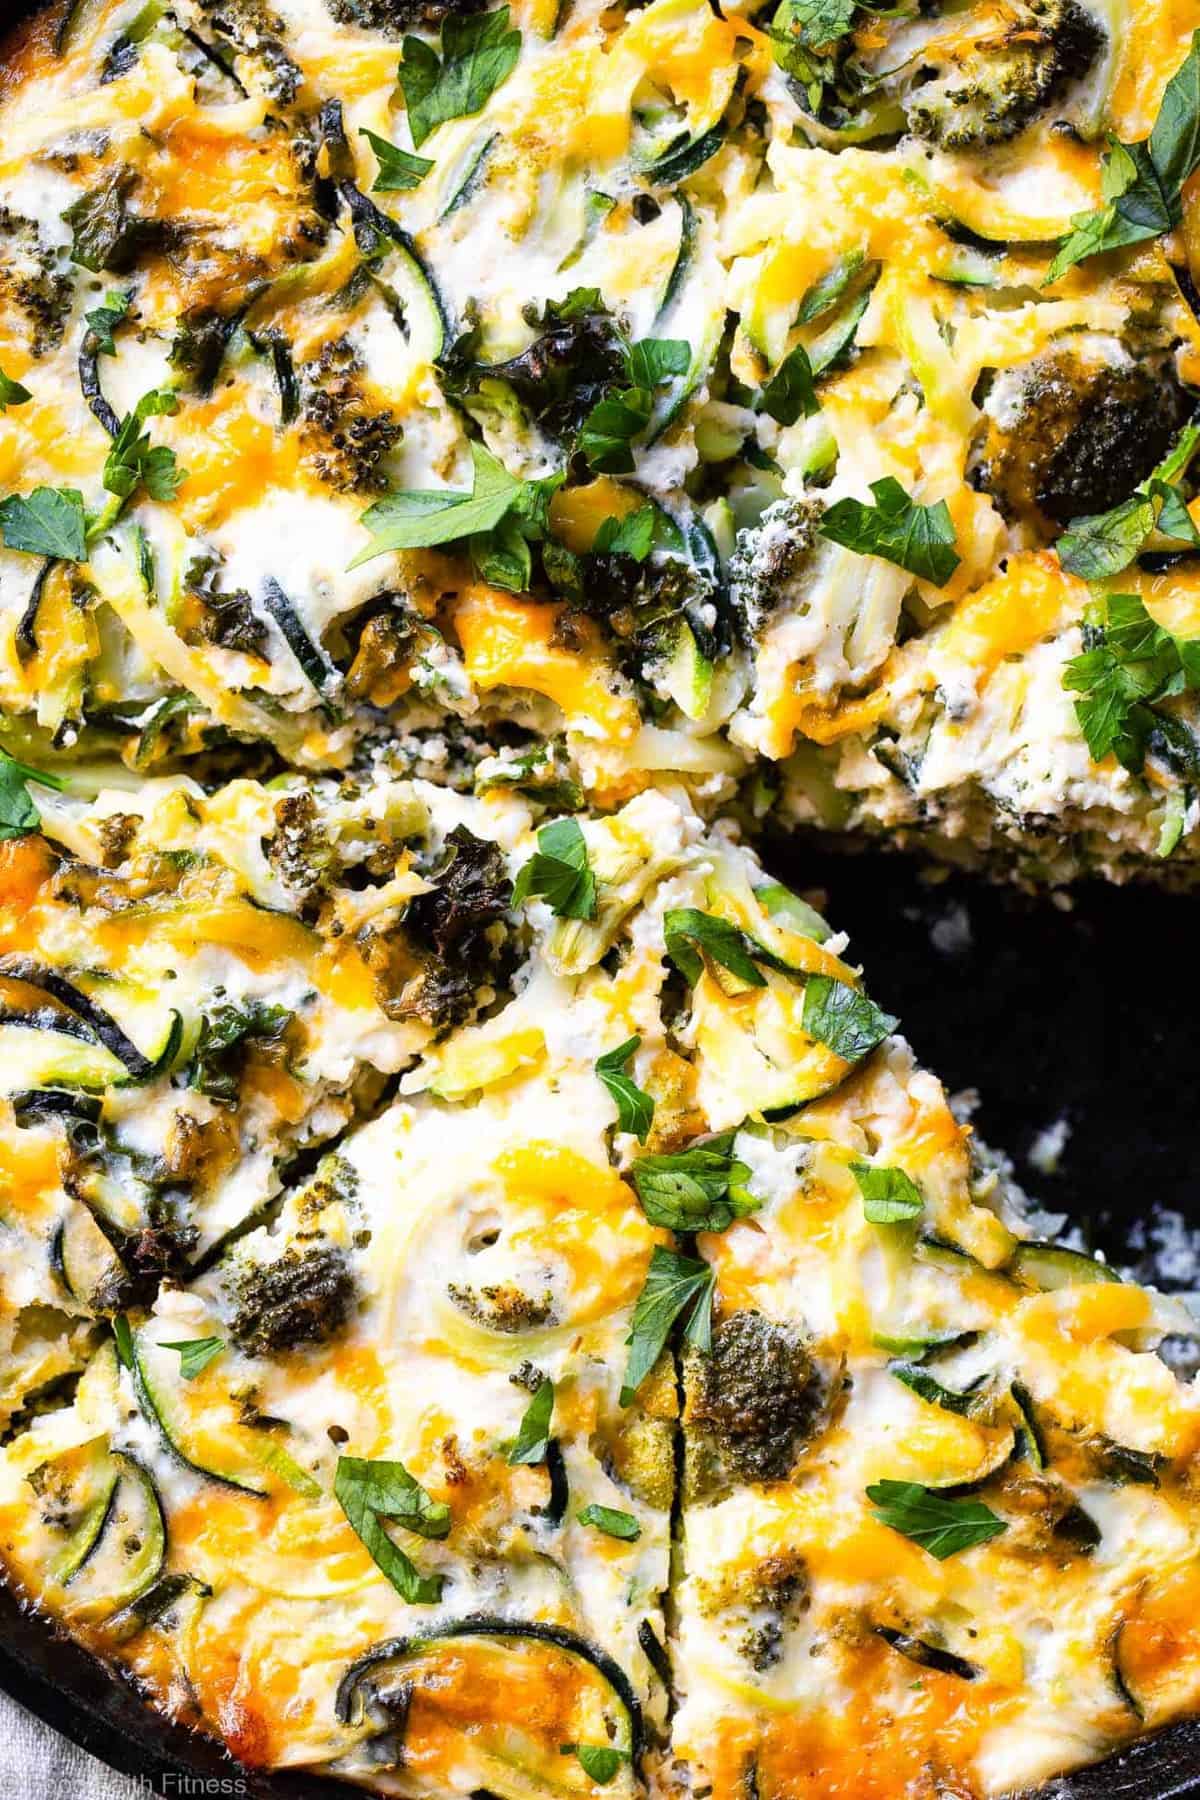 Baked Kale and Broccoli Cheesy Zucchini Casserole - This low carb, gluten free Healthy Baked Cheesy Zucchini Casserole is a quick, easy and healthy dinner that even your kids will love! Protein packed, only 1 Freestyle point and 167 calories too! | #Foodfaithfitness |